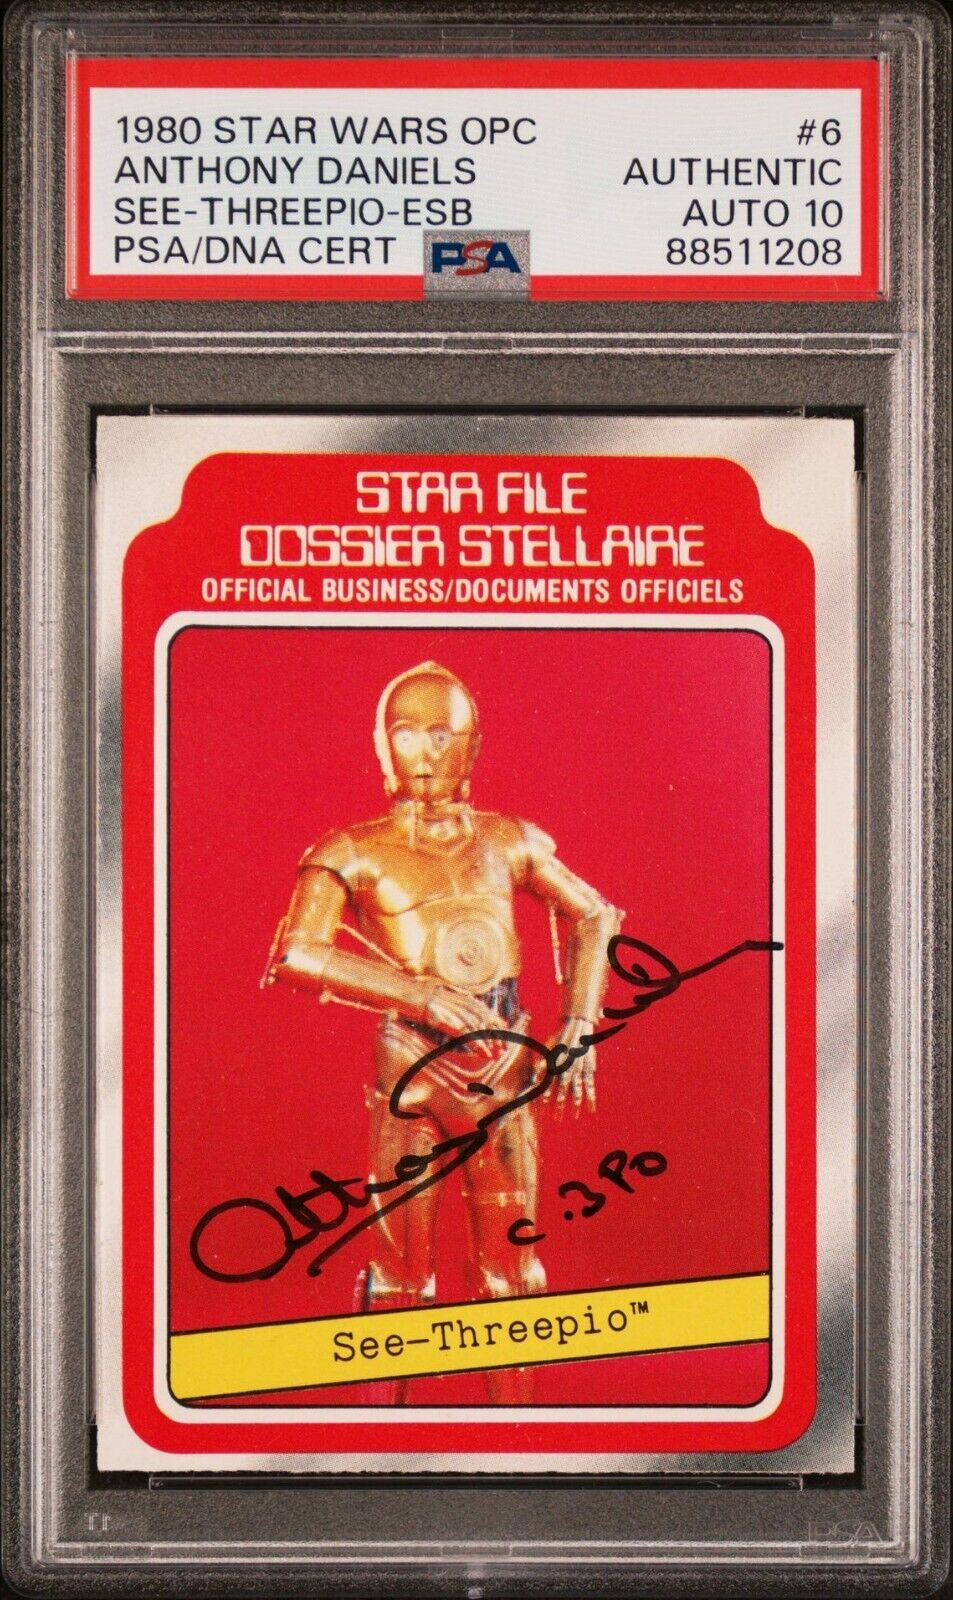 1980 Star Wars #6 Anthony Daniels pack fresh OPC  w/autograph PSA/DNA AUTO 10